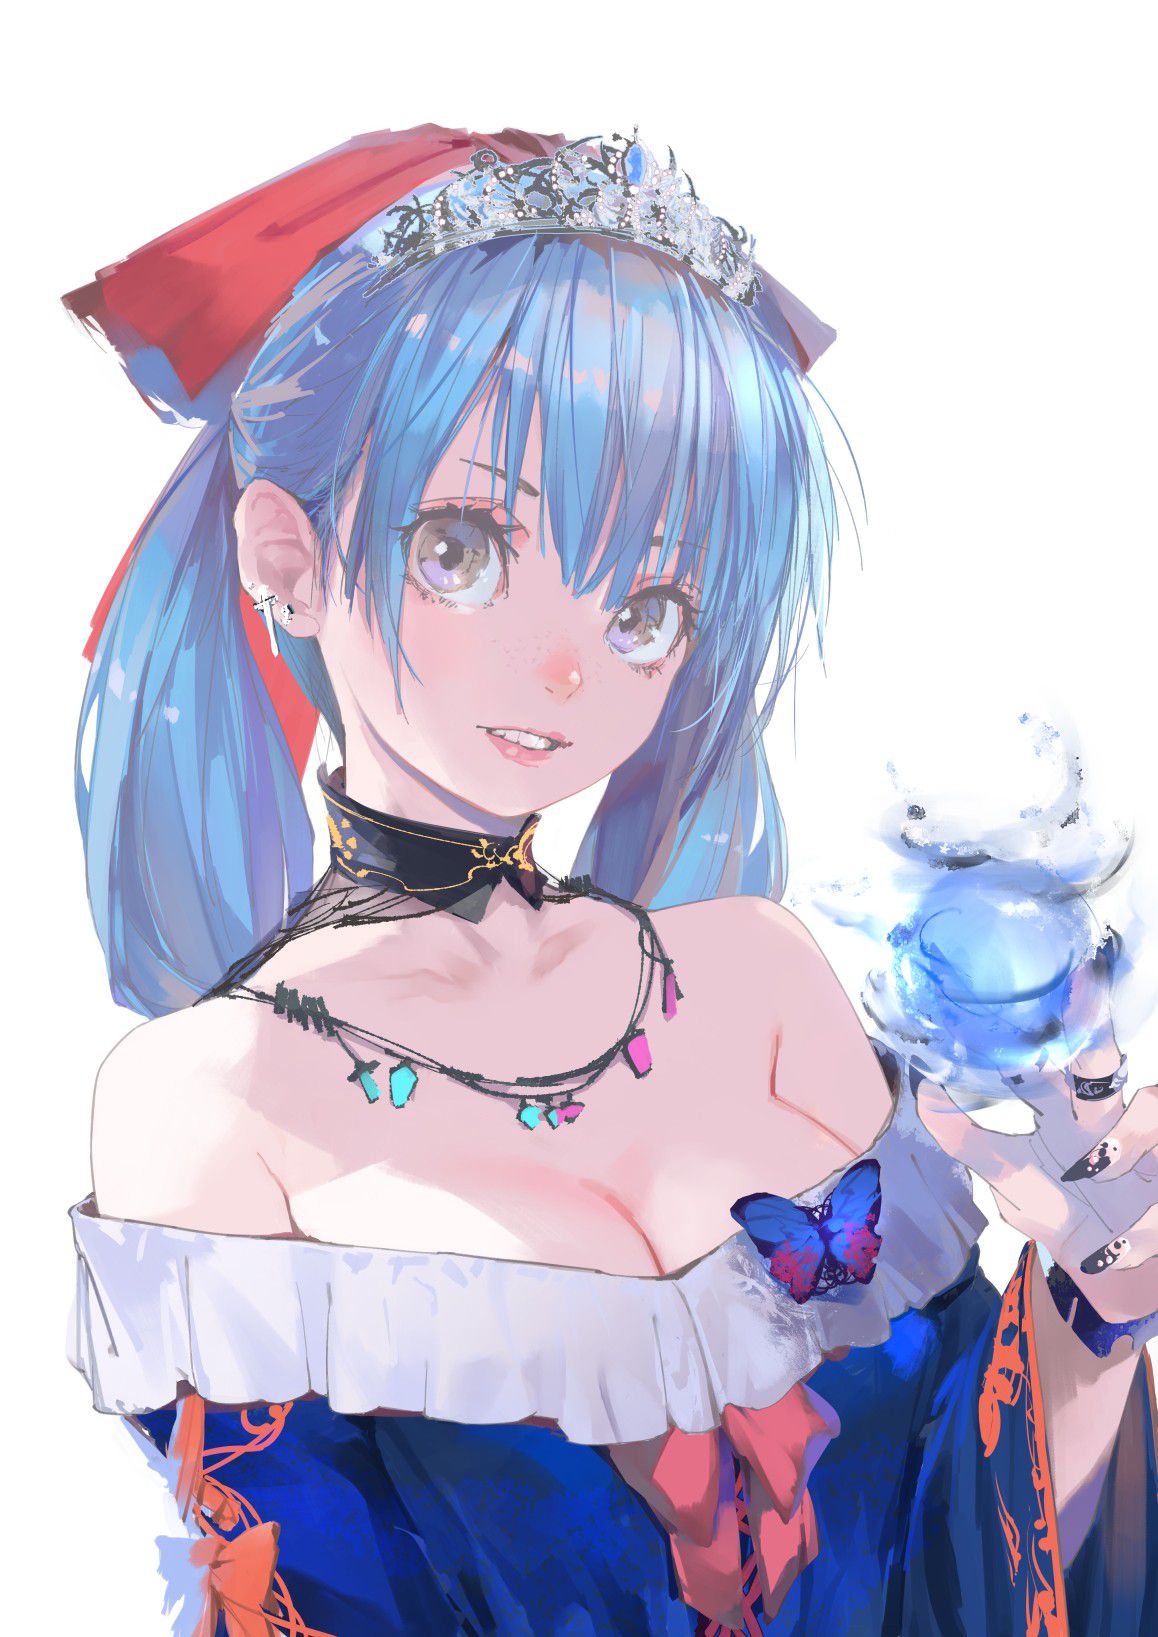 [2nd] Secondary erotic image of a girl with blue or light blue hair Part 18 [ blue hair ] 19